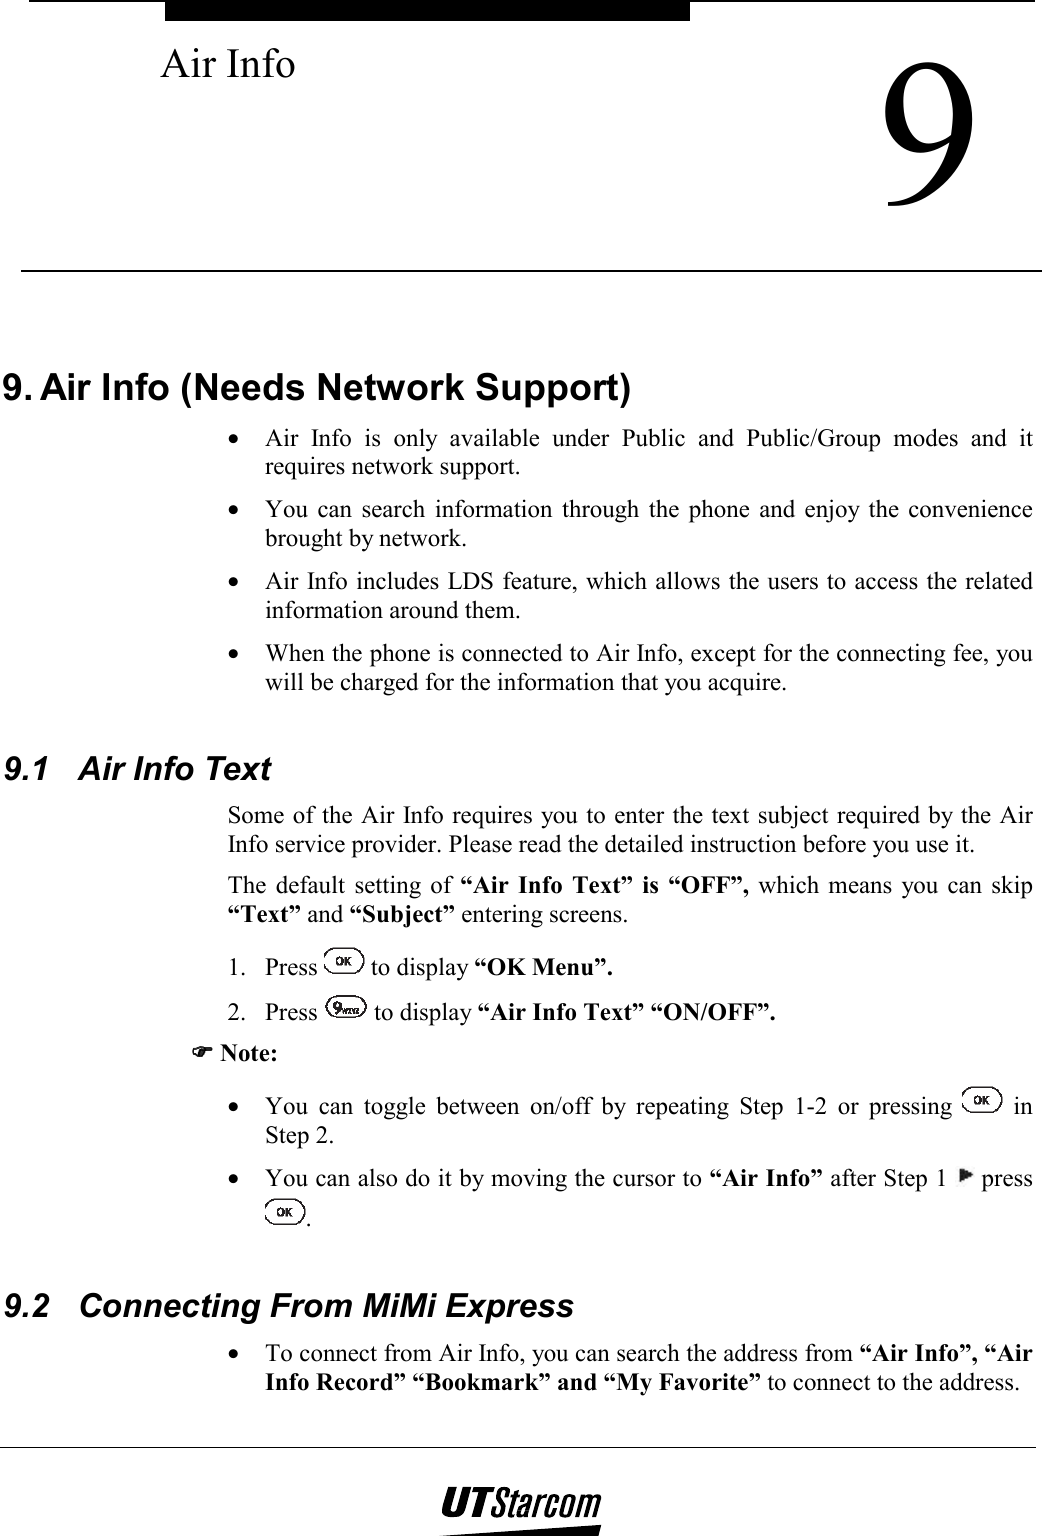  9 Air Info    9. Air Info (Needs Network Support) •  Air Info is only available under Public and Public/Group modes and it requires network support. •  You can search information through the phone and enjoy the convenience brought by network. •  Air Info includes LDS feature, which allows the users to access the related information around them. •  When the phone is connected to Air Info, except for the connecting fee, you will be charged for the information that you acquire.   9.1  Air Info Text Some of the Air Info requires you to enter the text subject required by the Air Info service provider. Please read the detailed instruction before you use it. The default setting of “Air Info Text” is “OFF”, which means you can skip “Text” and “Subject” entering screens. 1. Press   to display “OK Menu”. 2. Press   to display “Air Info Text” “ON/OFF”. )))) Note: •  You can toggle between on/off by repeating Step 1-2 or pressing   in Step 2. •  You can also do it by moving the cursor to “Air Info” after Step 1   press .  9.2  Connecting From MiMi Express •  To connect from Air Info, you can search the address from “Air Info”, “Air Info Record” “Bookmark” and “My Favorite” to connect to the address. 